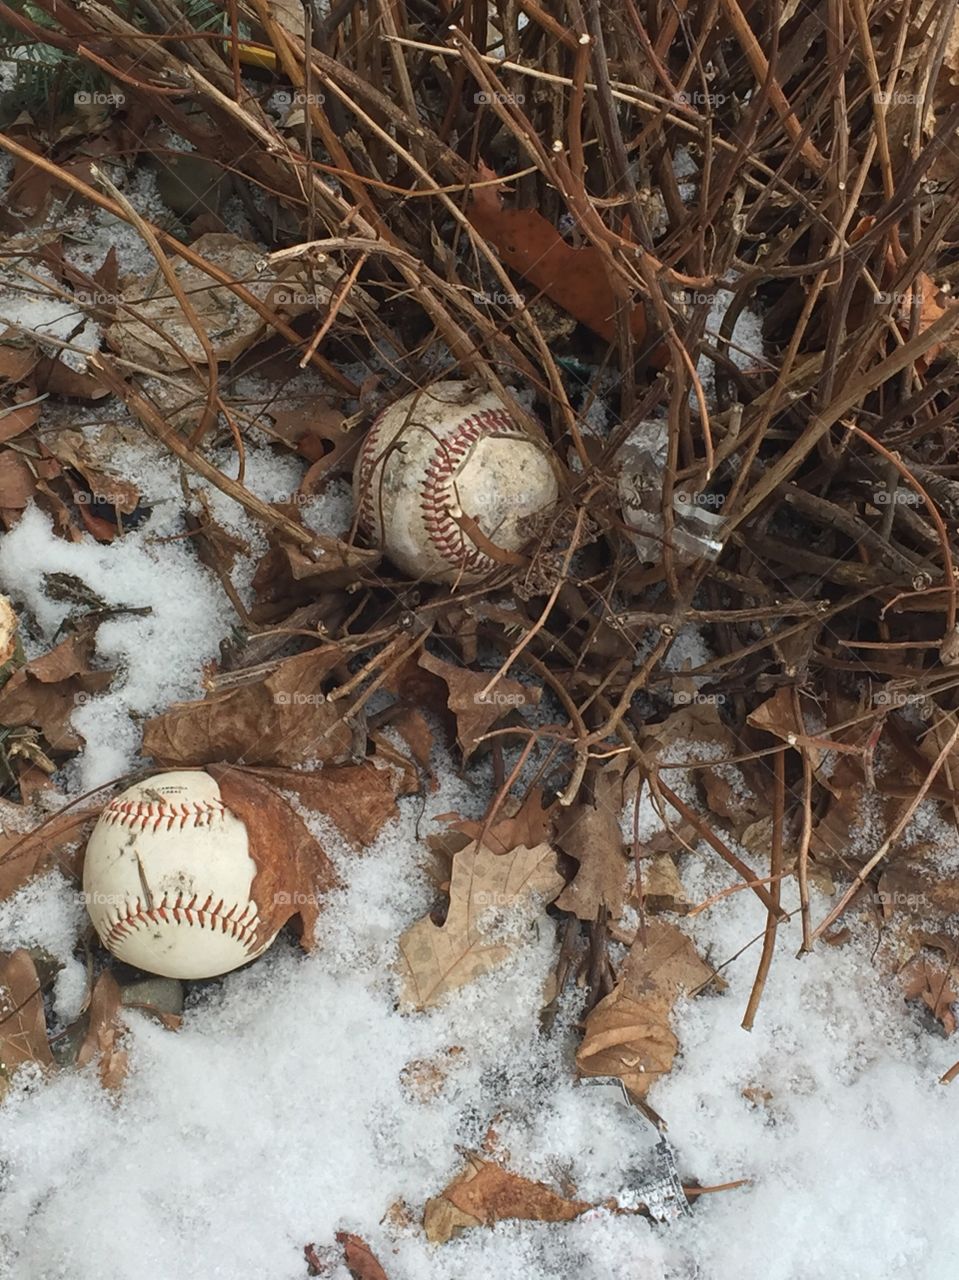 What you find in the bushes baseball left outside 